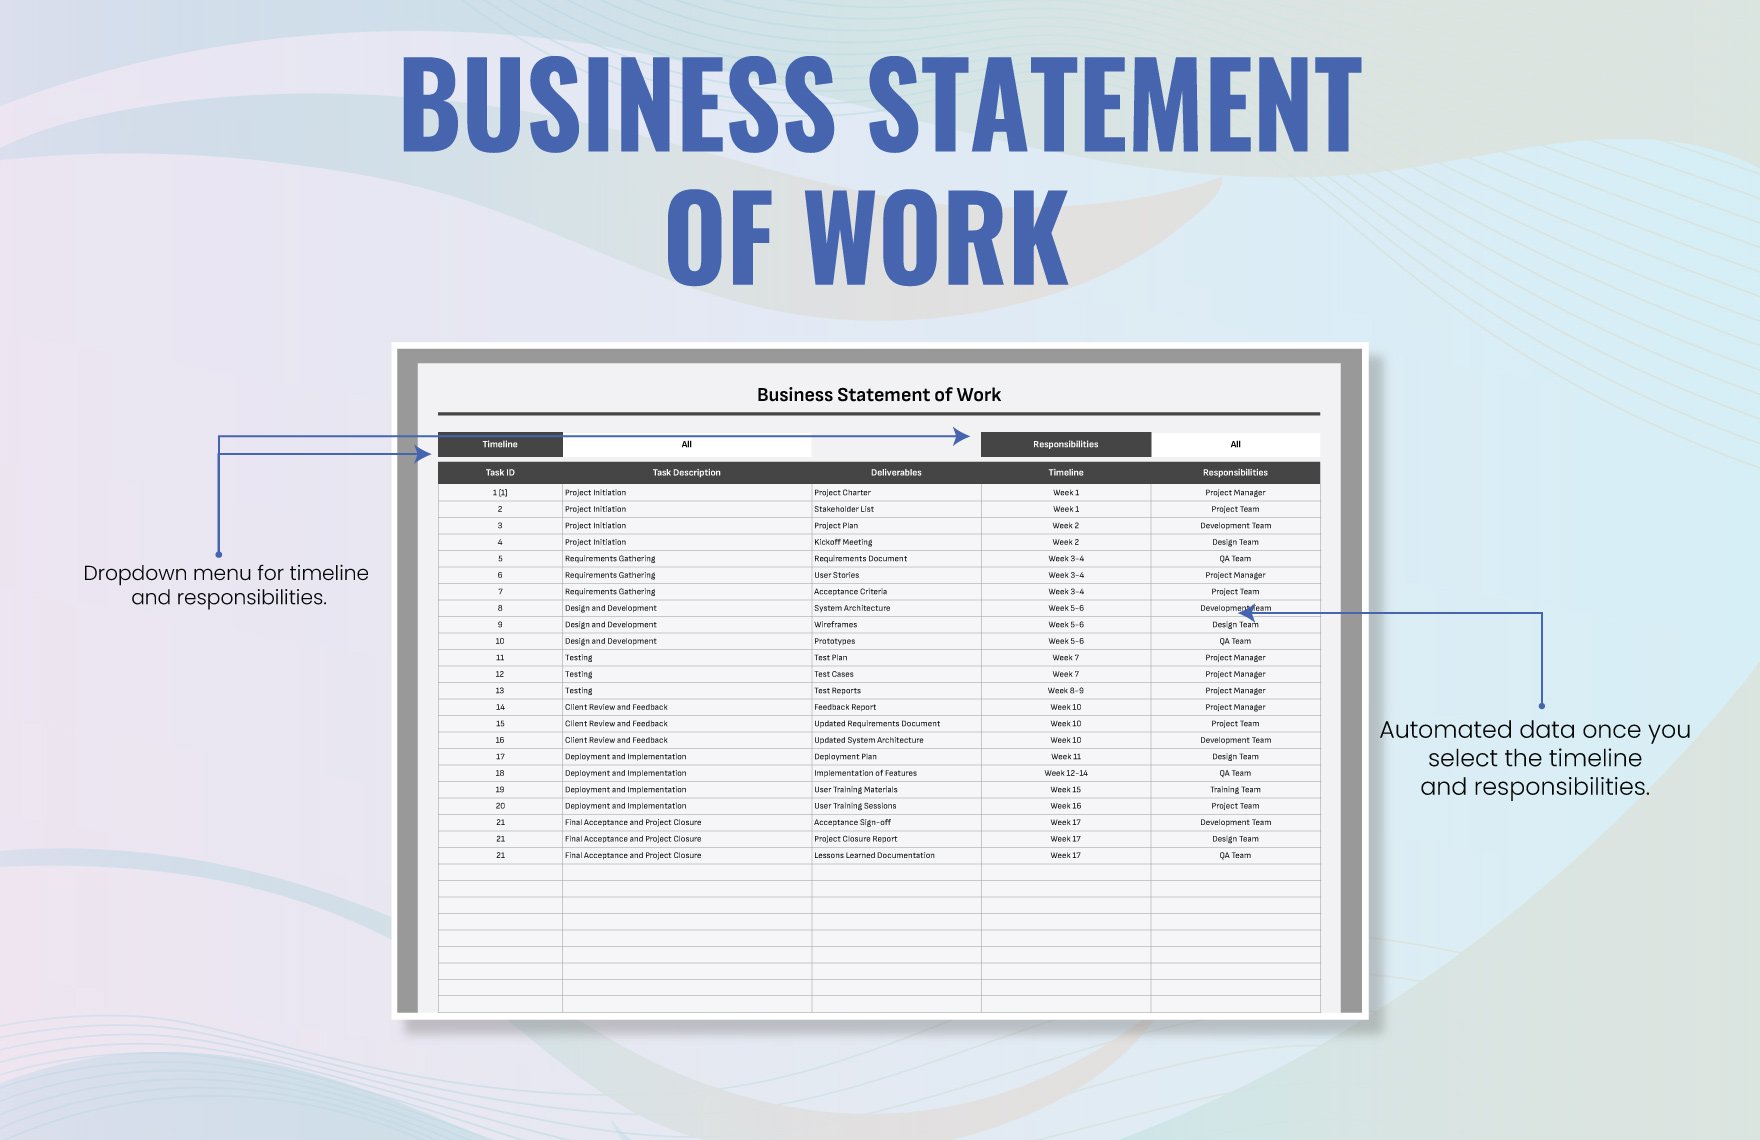 Business Statement of Work Template